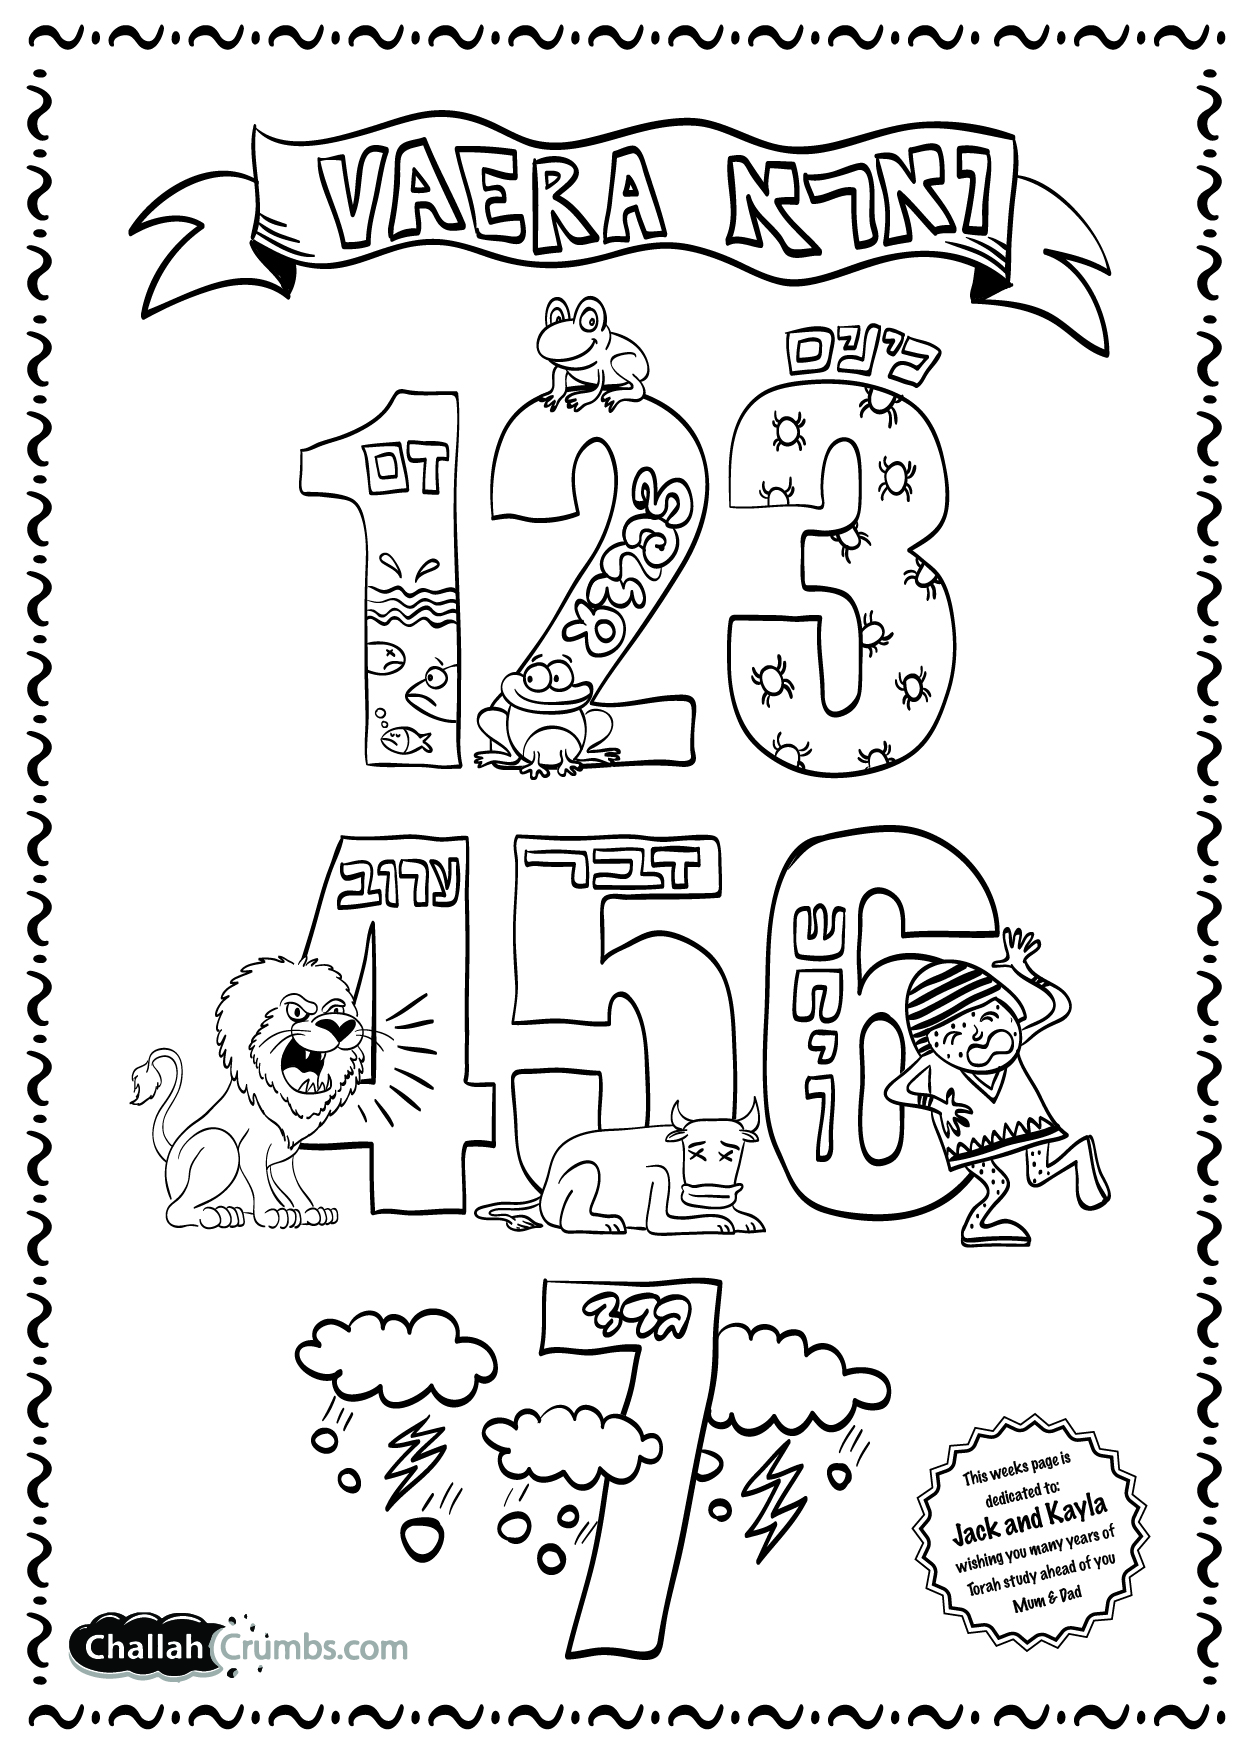 Coloring page for parshat vaayra click on picture to print